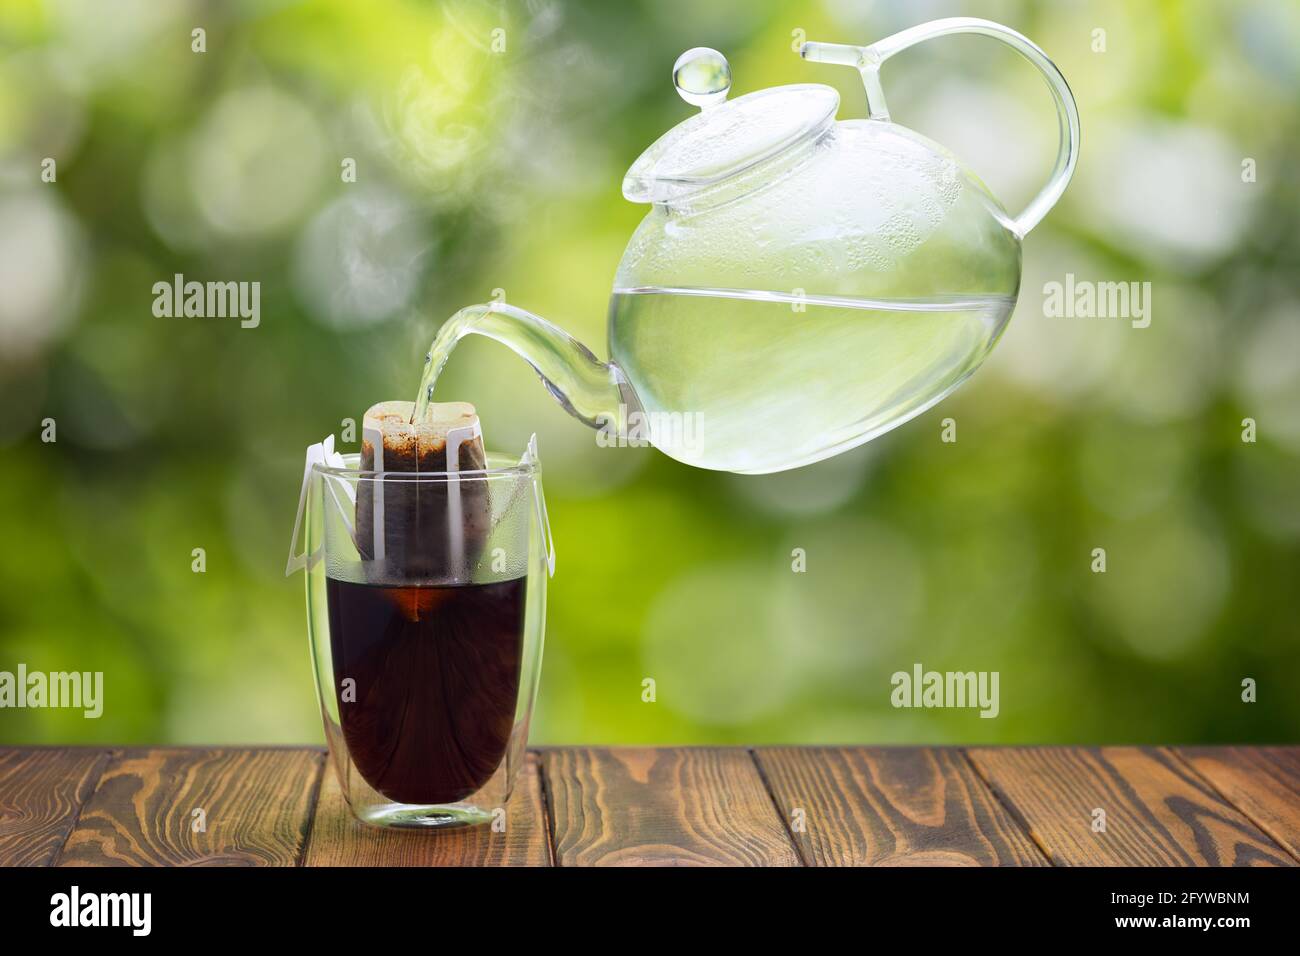 hand drip coffee in glass on wooden table Stock Photo